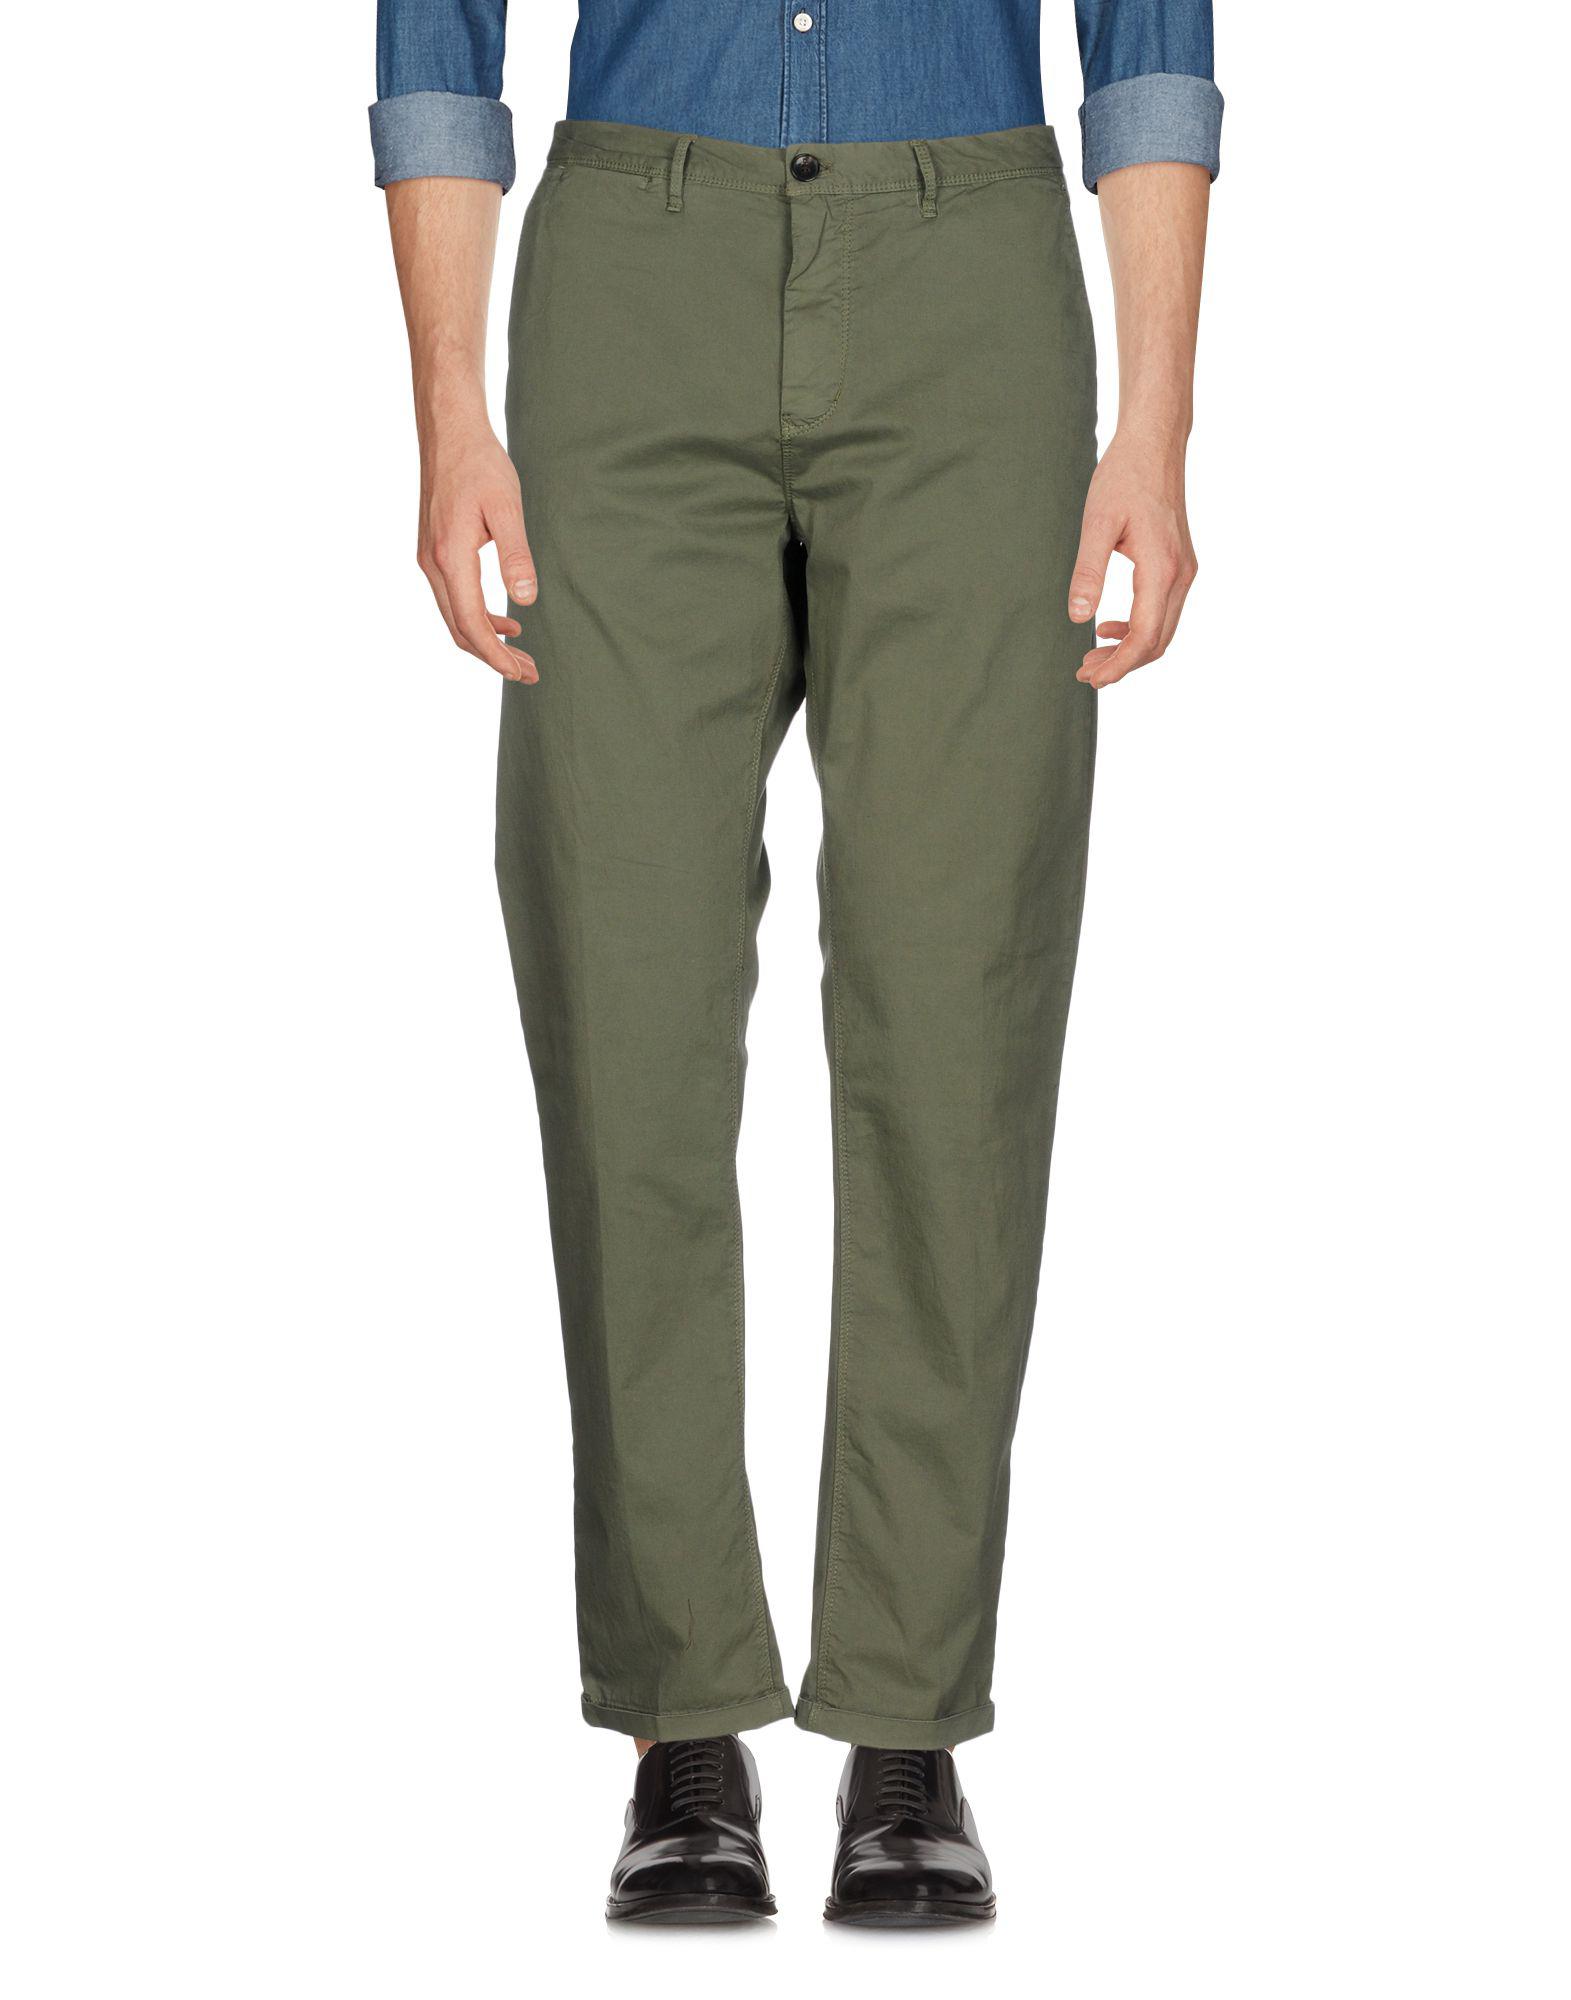 Scotch & Soda Cotton Casual Pants in Military Green (Green) for Men - Lyst